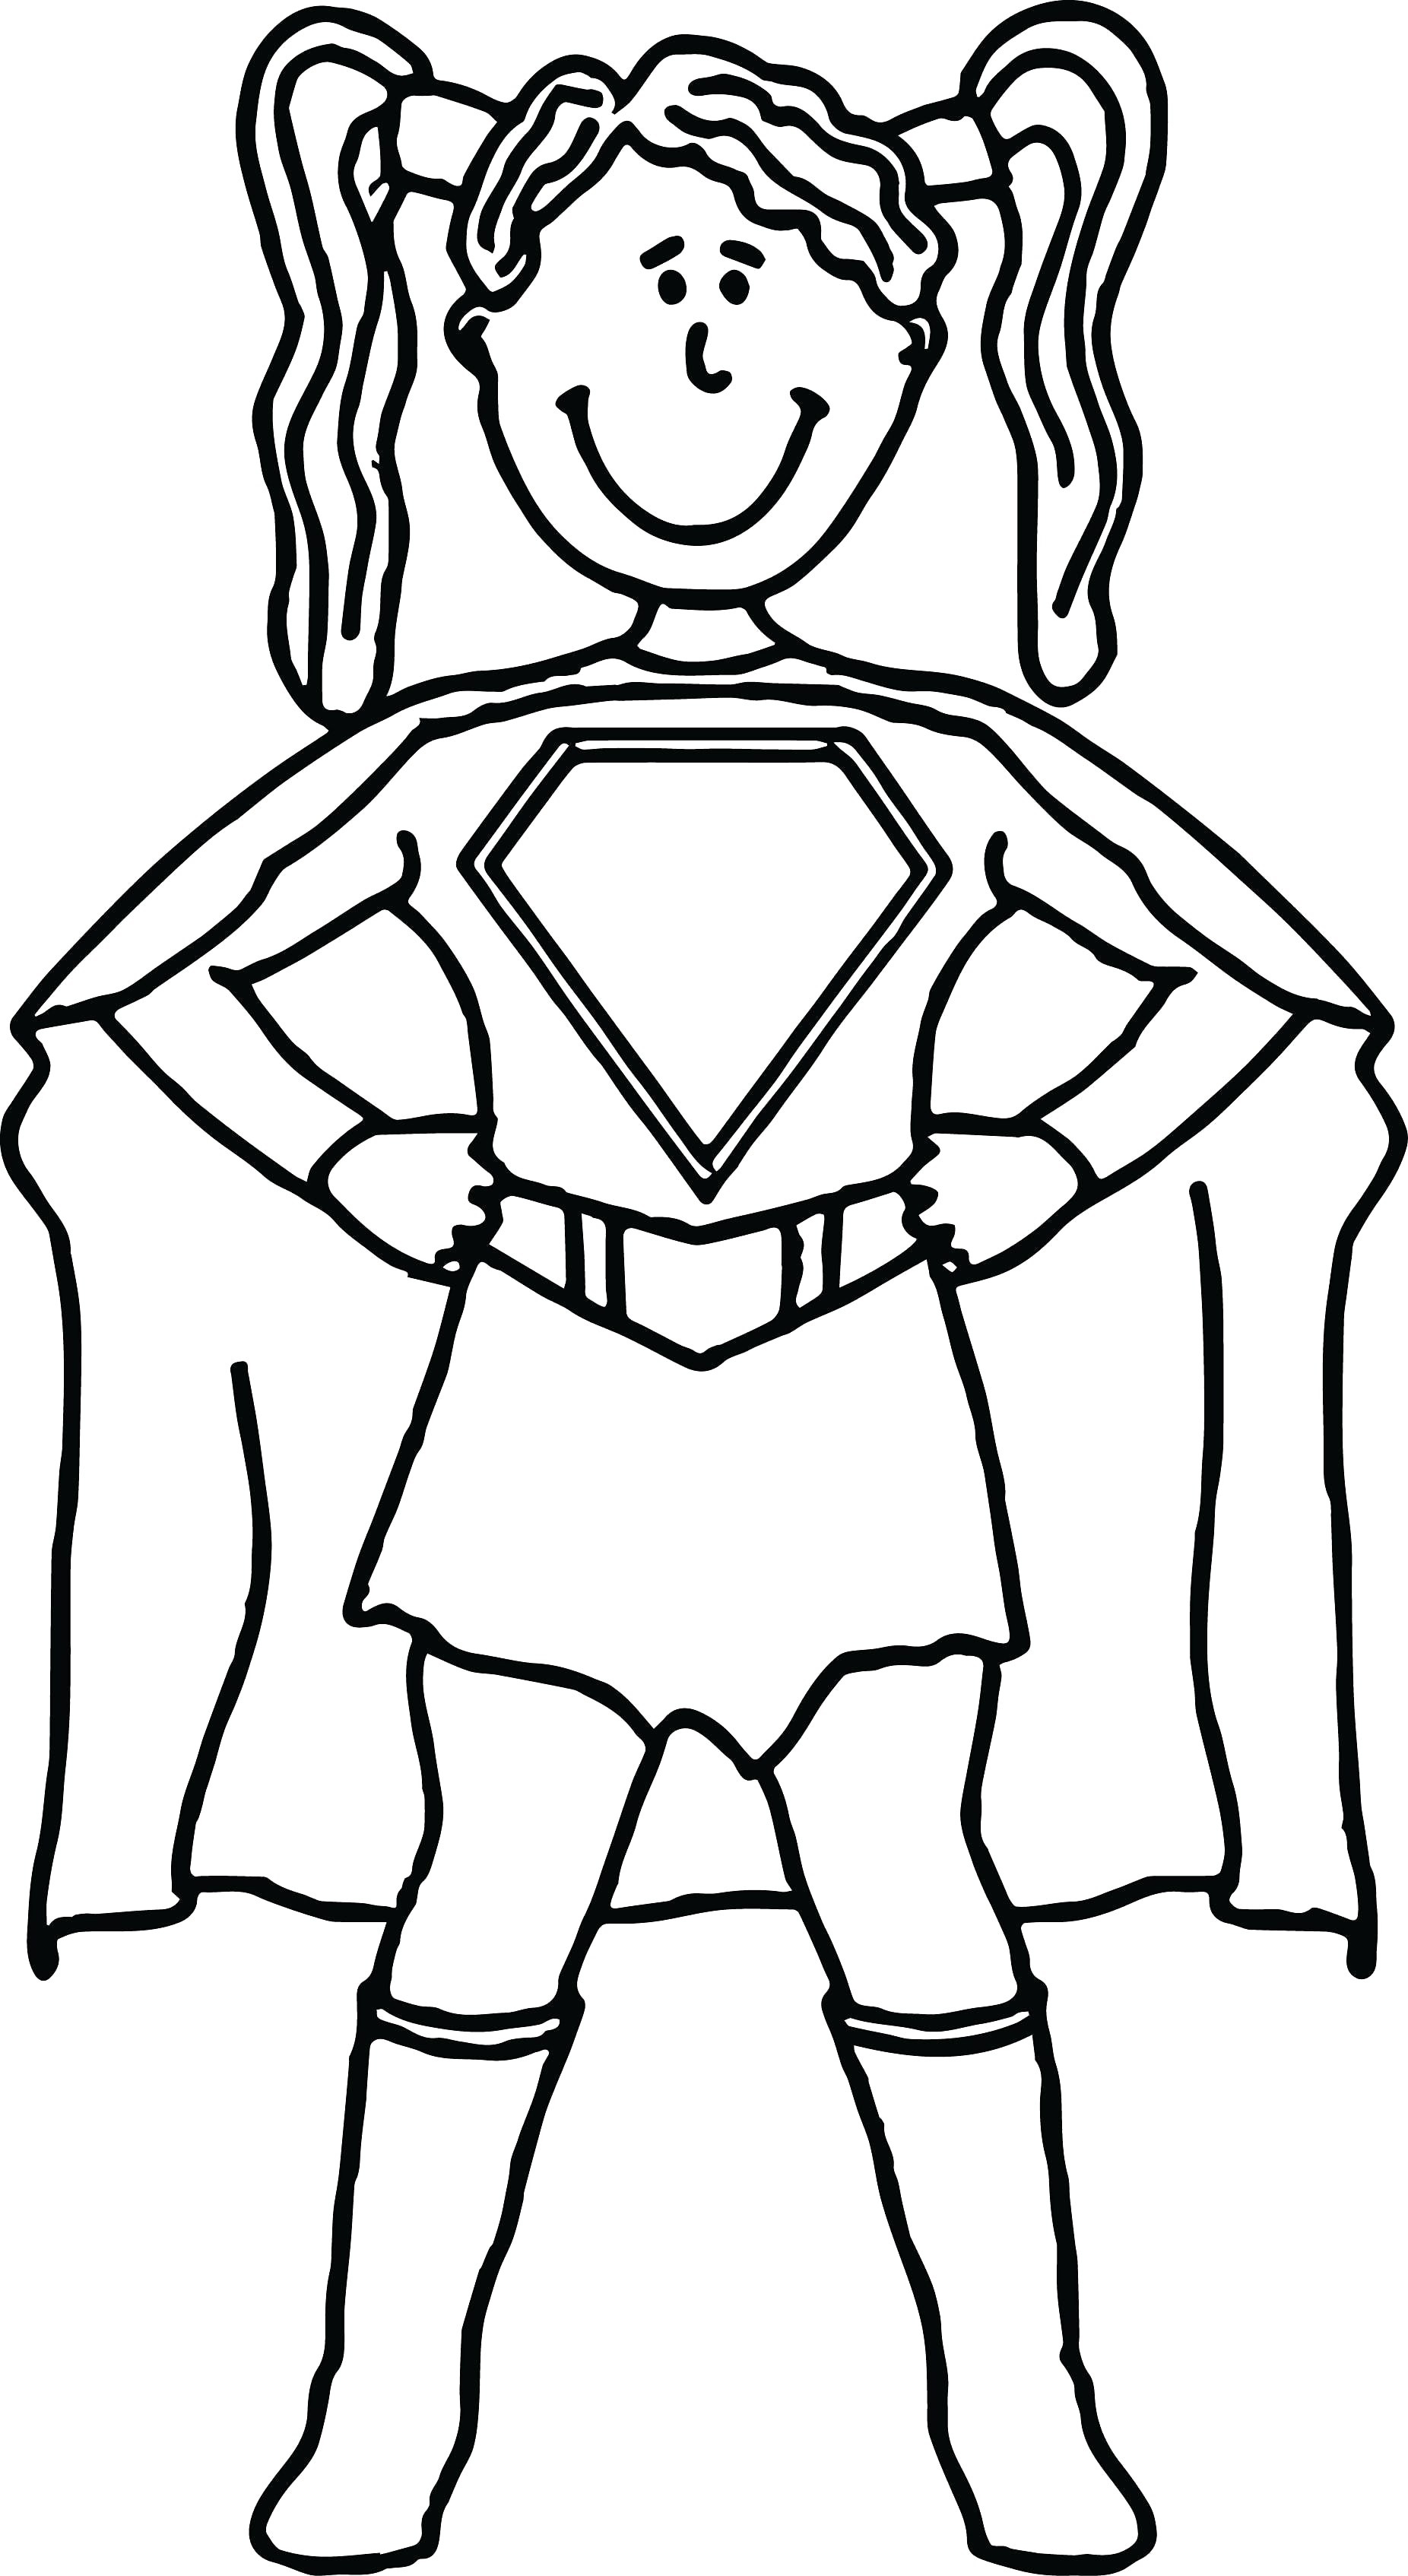 Superhero Cartoon Coloring Pages at GetDrawings.com | Free for personal